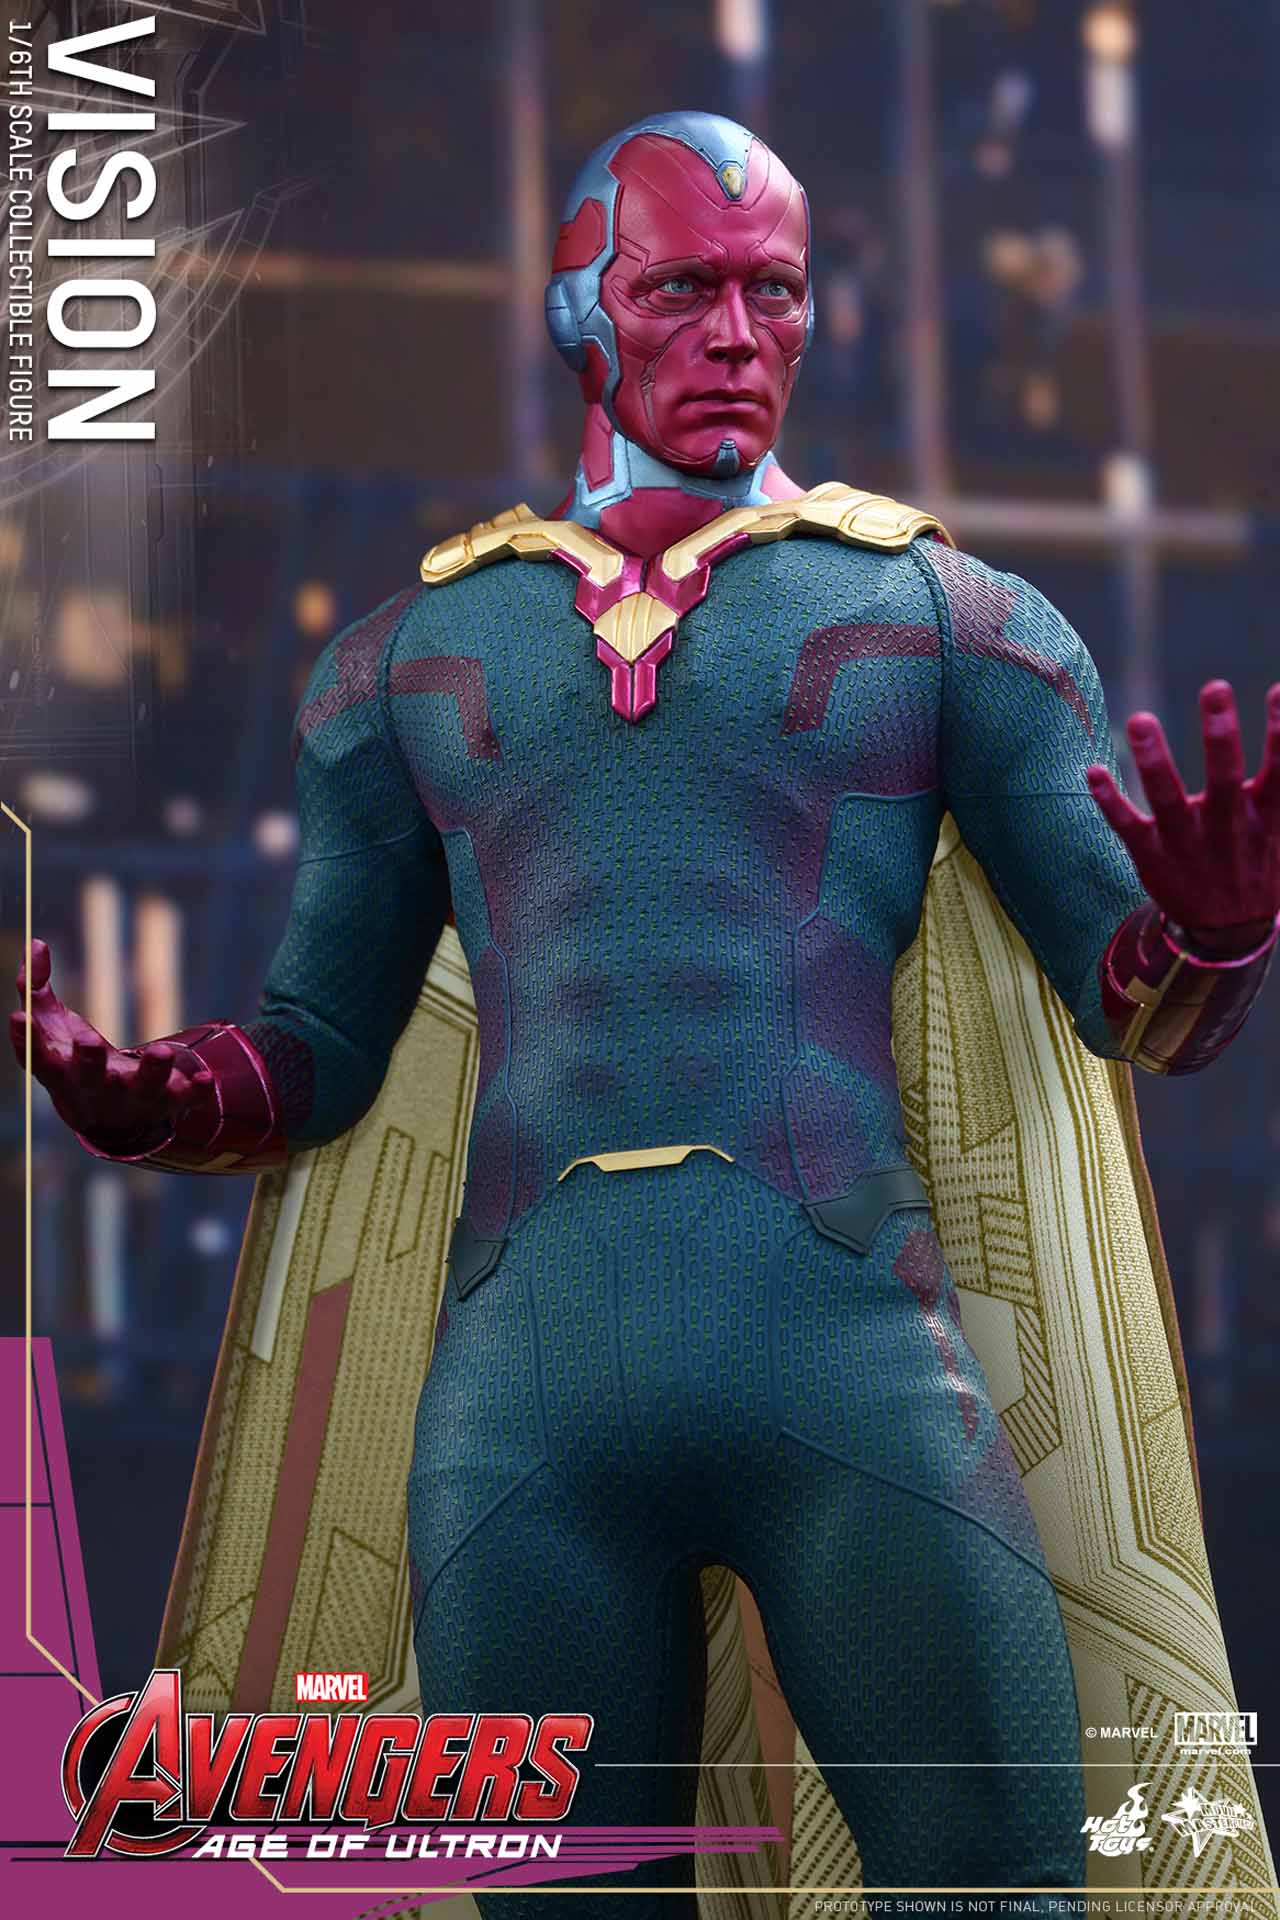 1/6th Scale Hot Toys Vision Collectible Figure